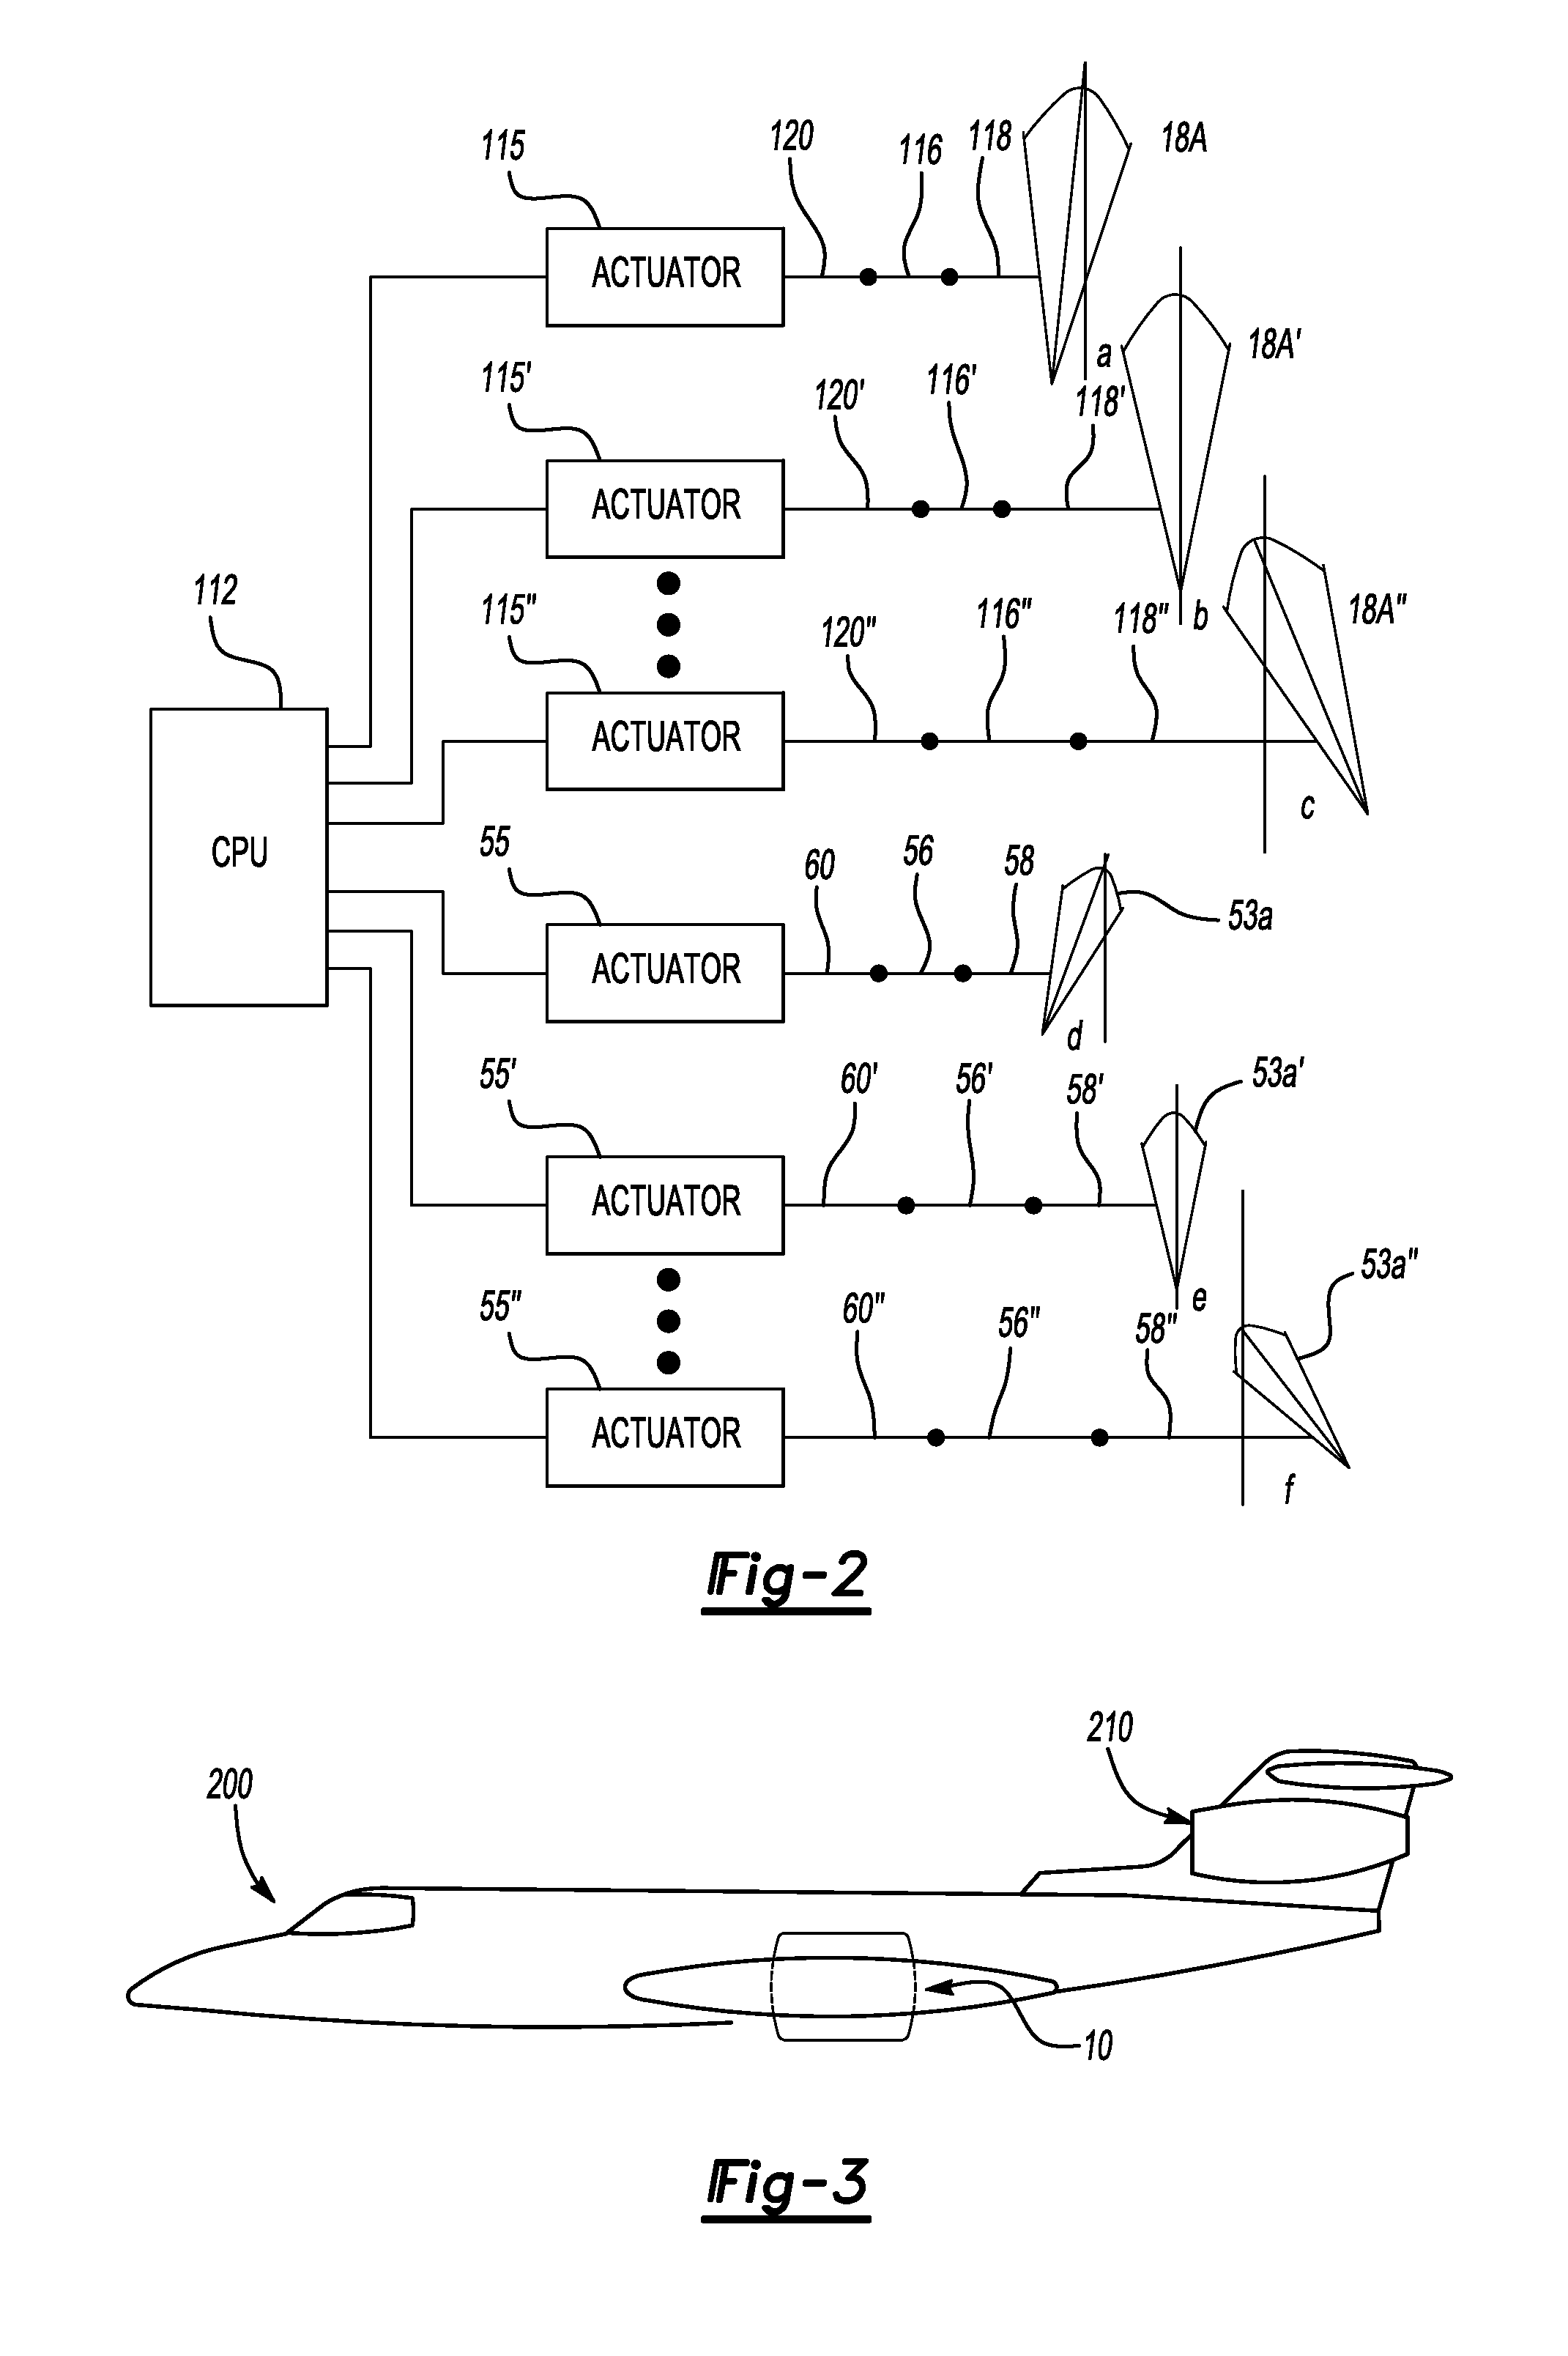 Individual inlet guide vane control for tip turbine engine